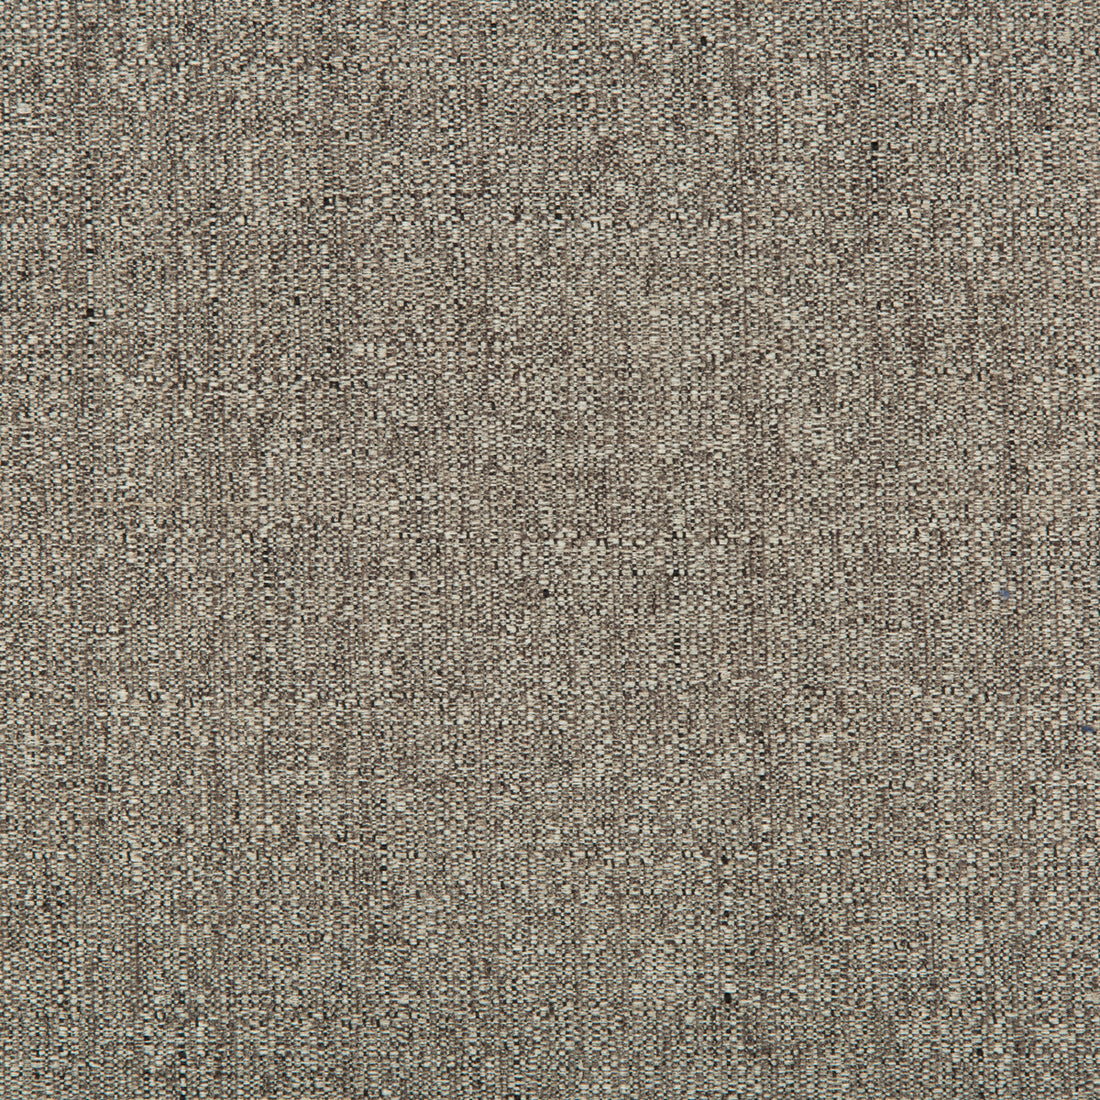 Kravet Contract fabric in 35479-21 color - pattern 35479.21.0 - by Kravet Contract